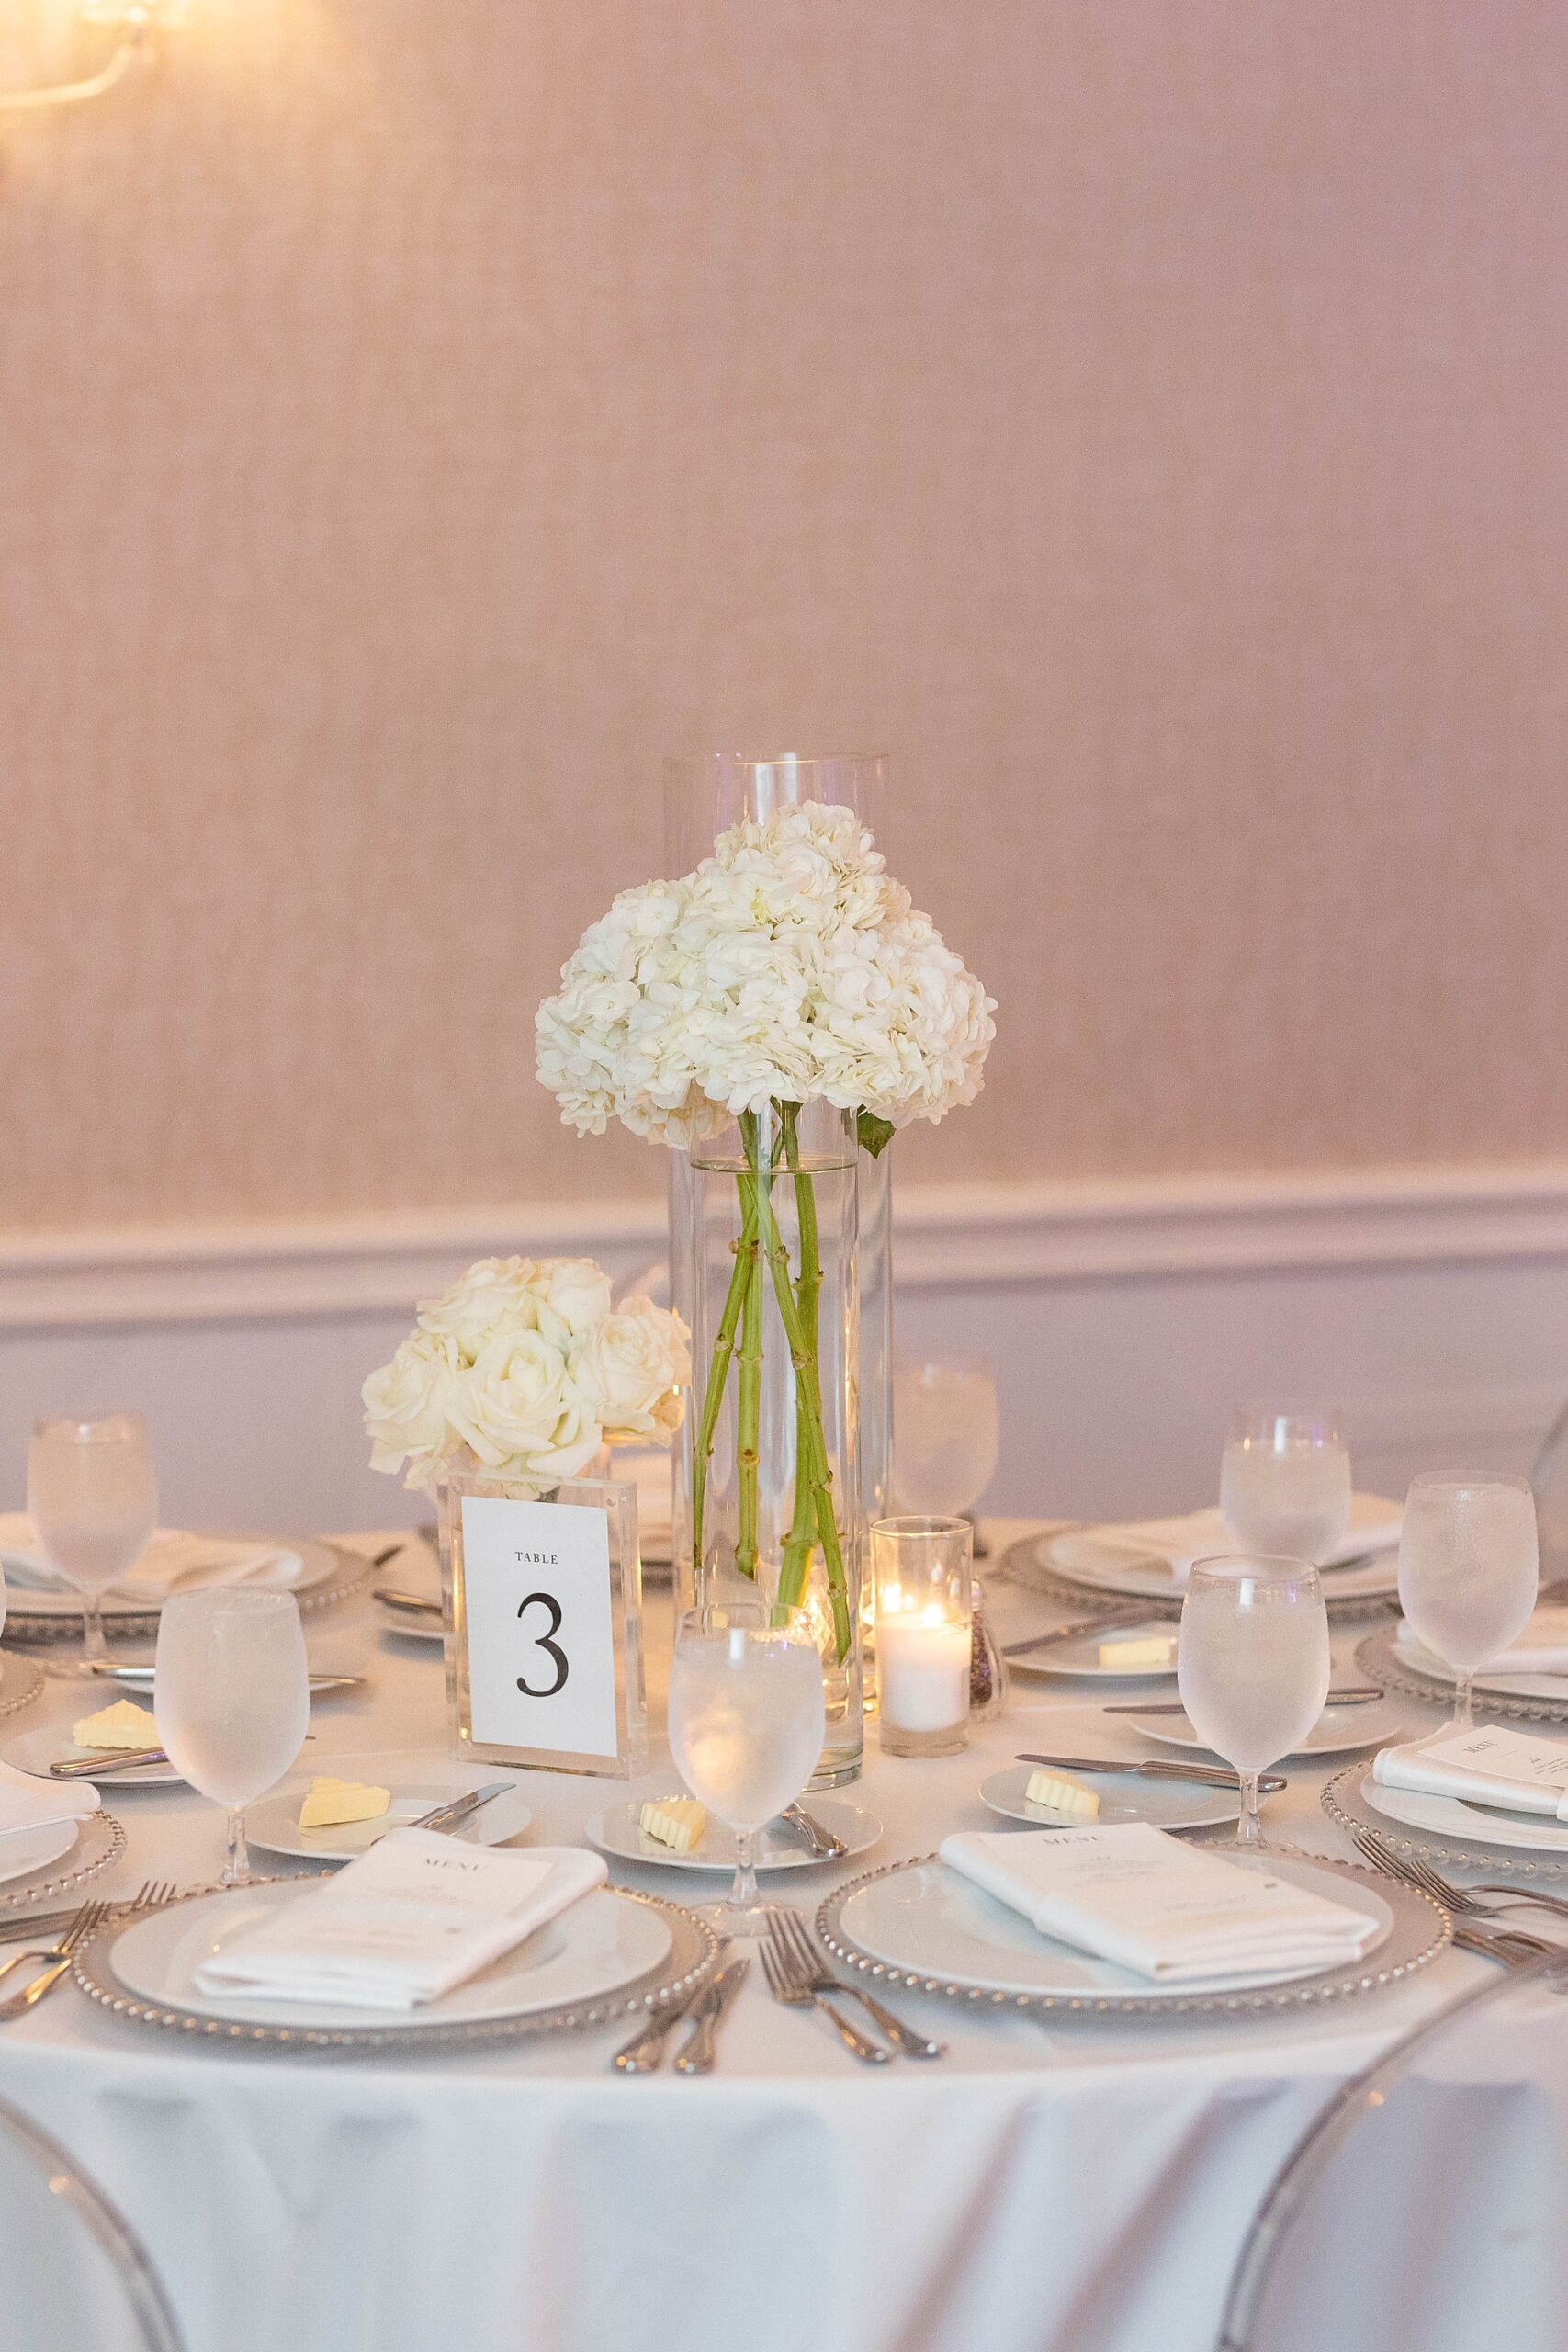 wedding reception centerpiece with white flowers and silver accents 